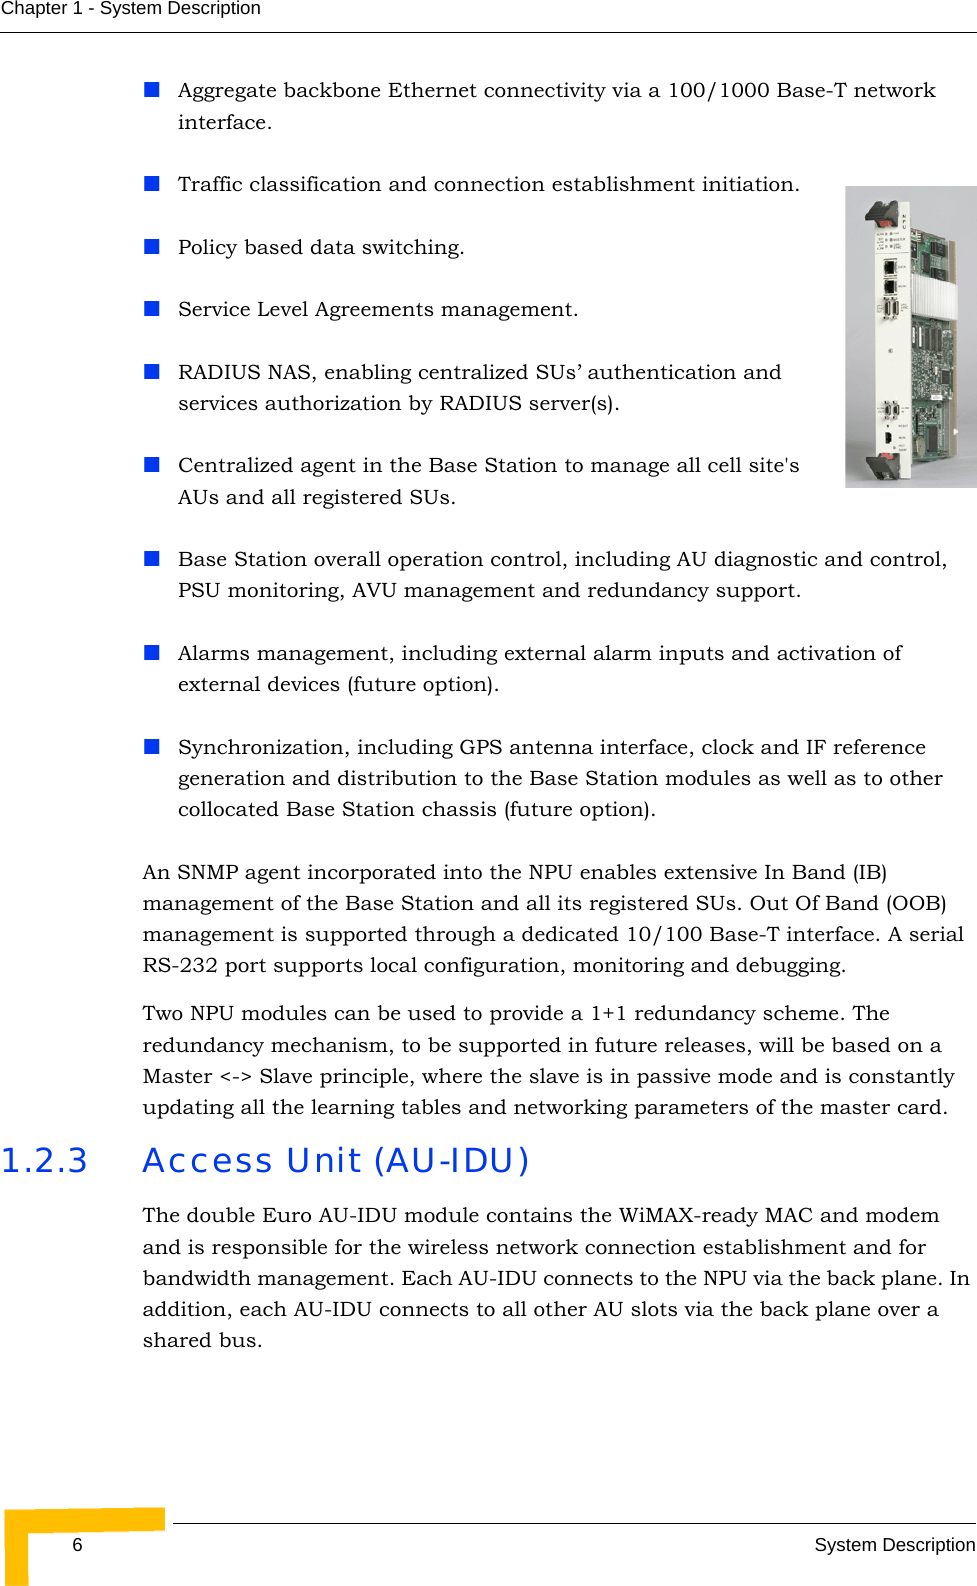 6System DescriptionChapter 1 - System DescriptionAggregate backbone Ethernet connectivity via a 100/1000 Base-T network interface.Traffic classification and connection establishment initiation.Policy based data switching.Service Level Agreements management.RADIUS NAS, enabling centralized SUs’ authentication and services authorization by RADIUS server(s).Centralized agent in the Base Station to manage all cell site&apos;s AUs and all registered SUs.Base Station overall operation control, including AU diagnostic and control, PSU monitoring, AVU management and redundancy support.Alarms management, including external alarm inputs and activation of external devices (future option).Synchronization, including GPS antenna interface, clock and IF reference generation and distribution to the Base Station modules as well as to other collocated Base Station chassis (future option).An SNMP agent incorporated into the NPU enables extensive In Band (IB) management of the Base Station and all its registered SUs. Out Of Band (OOB) management is supported through a dedicated 10/100 Base-T interface. A serial RS-232 port supports local configuration, monitoring and debugging.Two NPU modules can be used to provide a 1+1 redundancy scheme. The redundancy mechanism, to be supported in future releases, will be based on a Master &lt;-&gt; Slave principle, where the slave is in passive mode and is constantly updating all the learning tables and networking parameters of the master card.1.2.3 Access Unit (AU-IDU)The double Euro AU-IDU module contains the WiMAX-ready MAC and modem and is responsible for the wireless network connection establishment and for bandwidth management. Each AU-IDU connects to the NPU via the back plane. In addition, each AU-IDU connects to all other AU slots via the back plane over a shared bus.